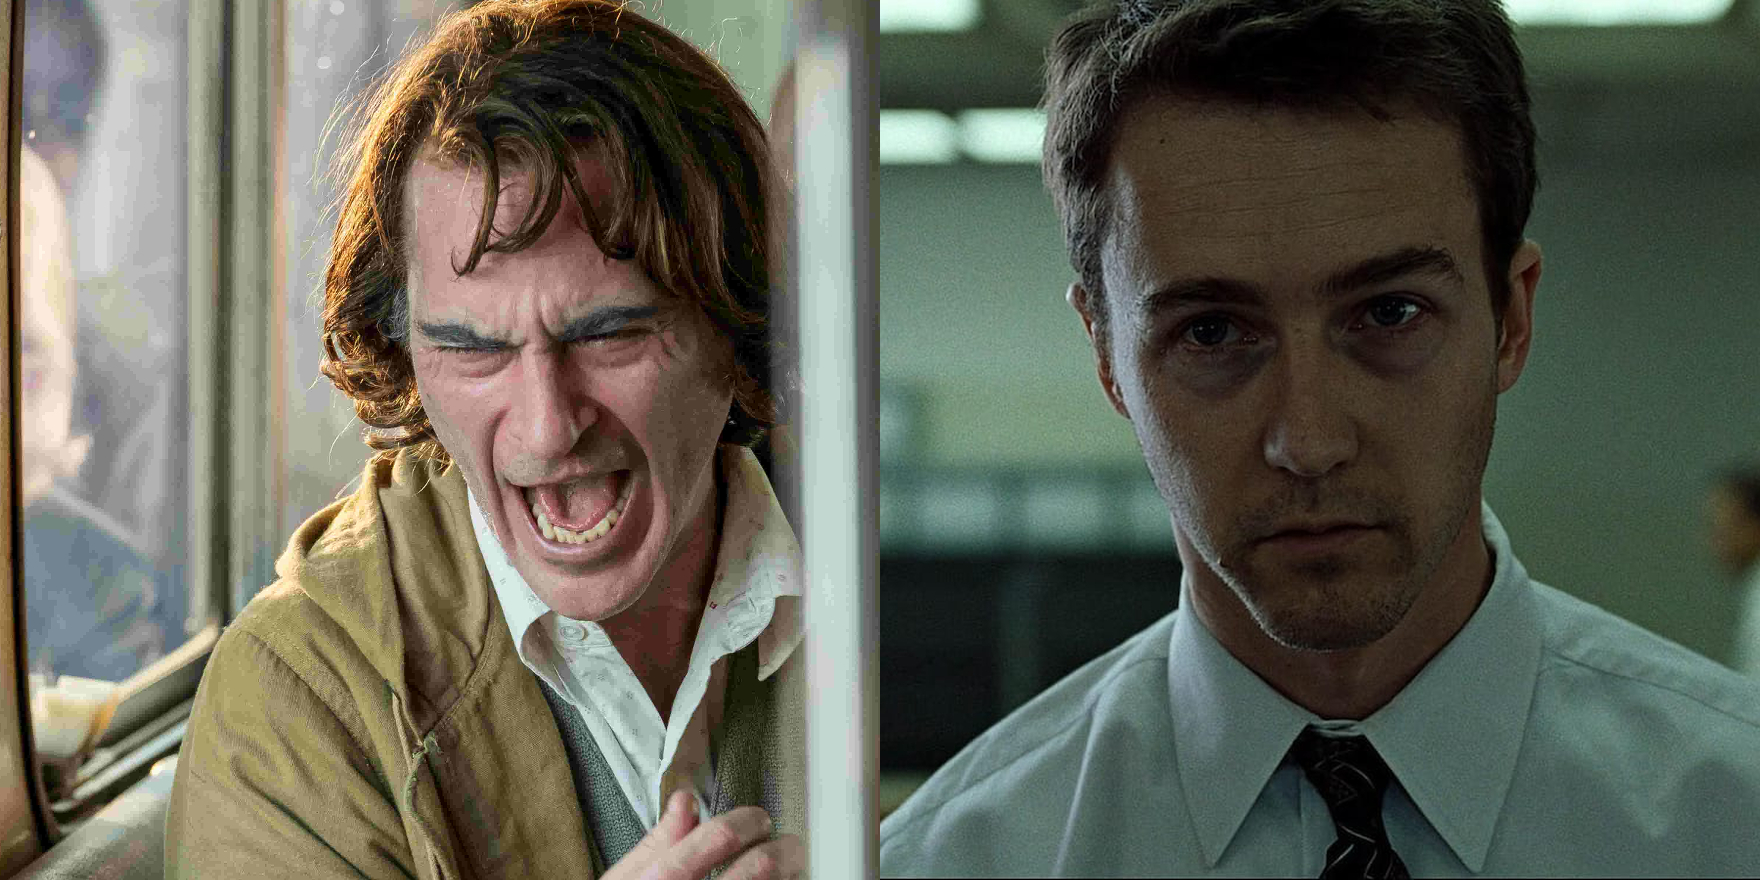 On Joker, Fight Club and the Danger of Self-Fulfilling Cautionary Tales